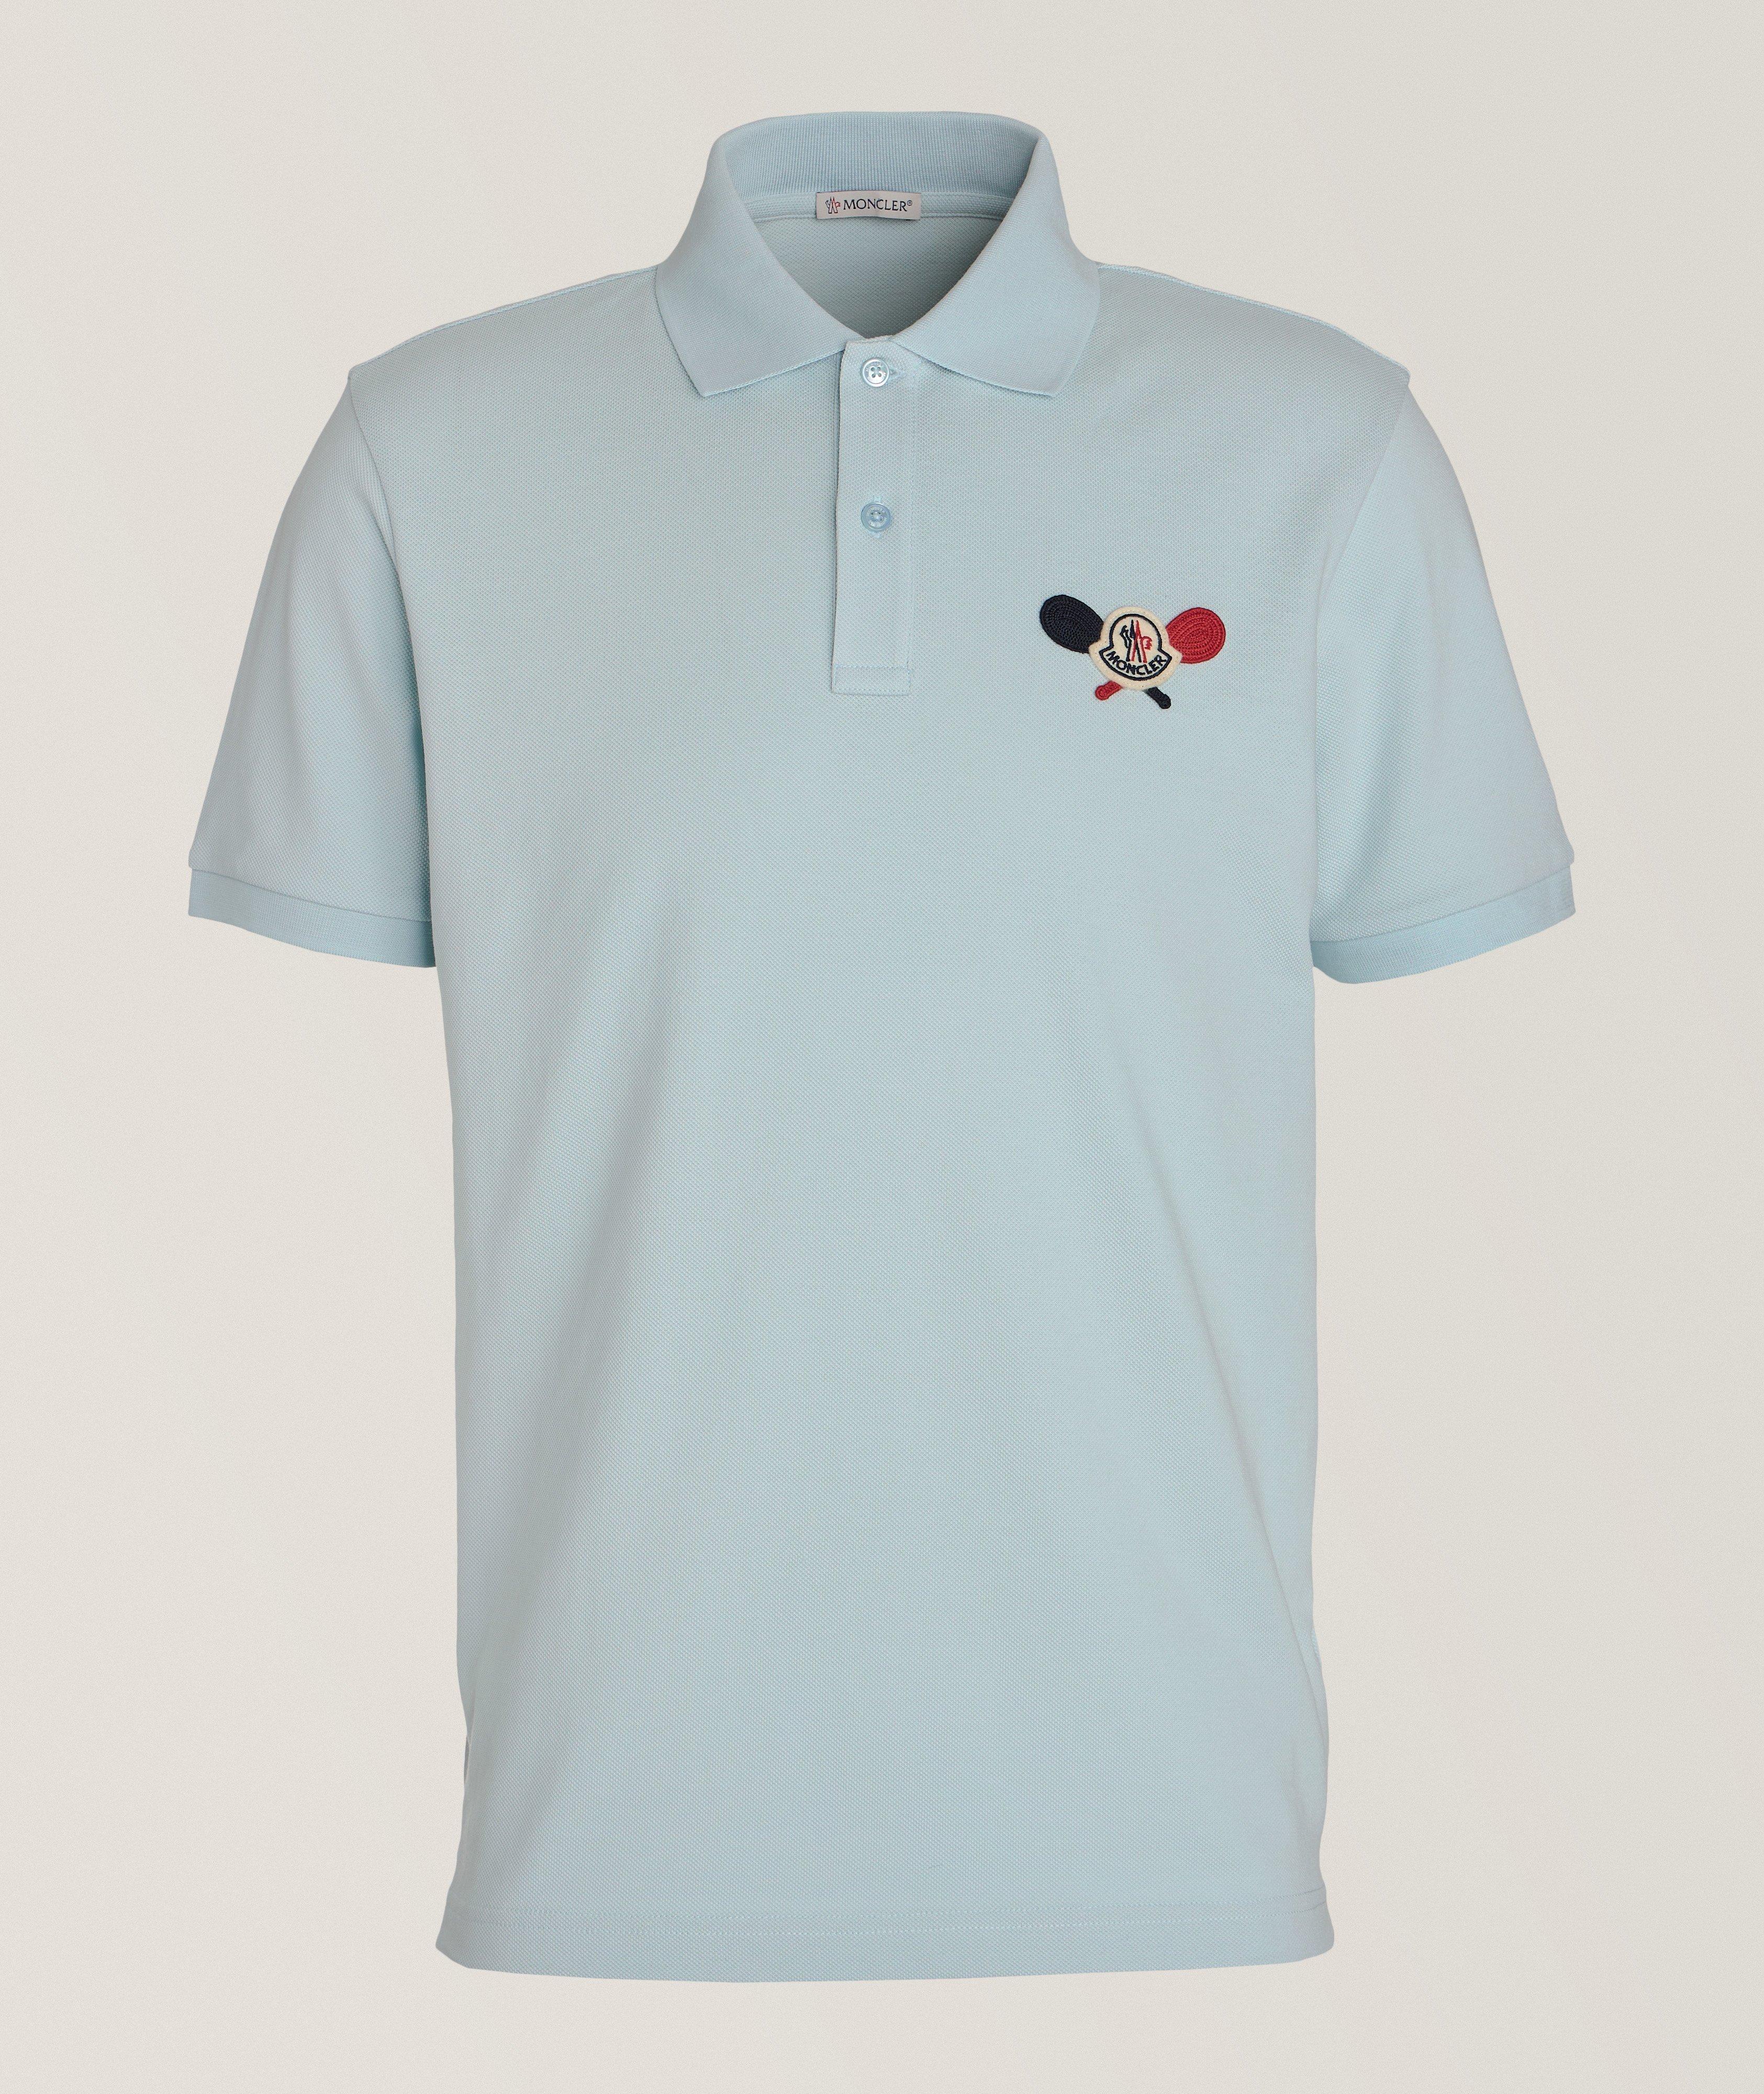 Embroidered Crossed Racket Logo Cotton Polo image 0